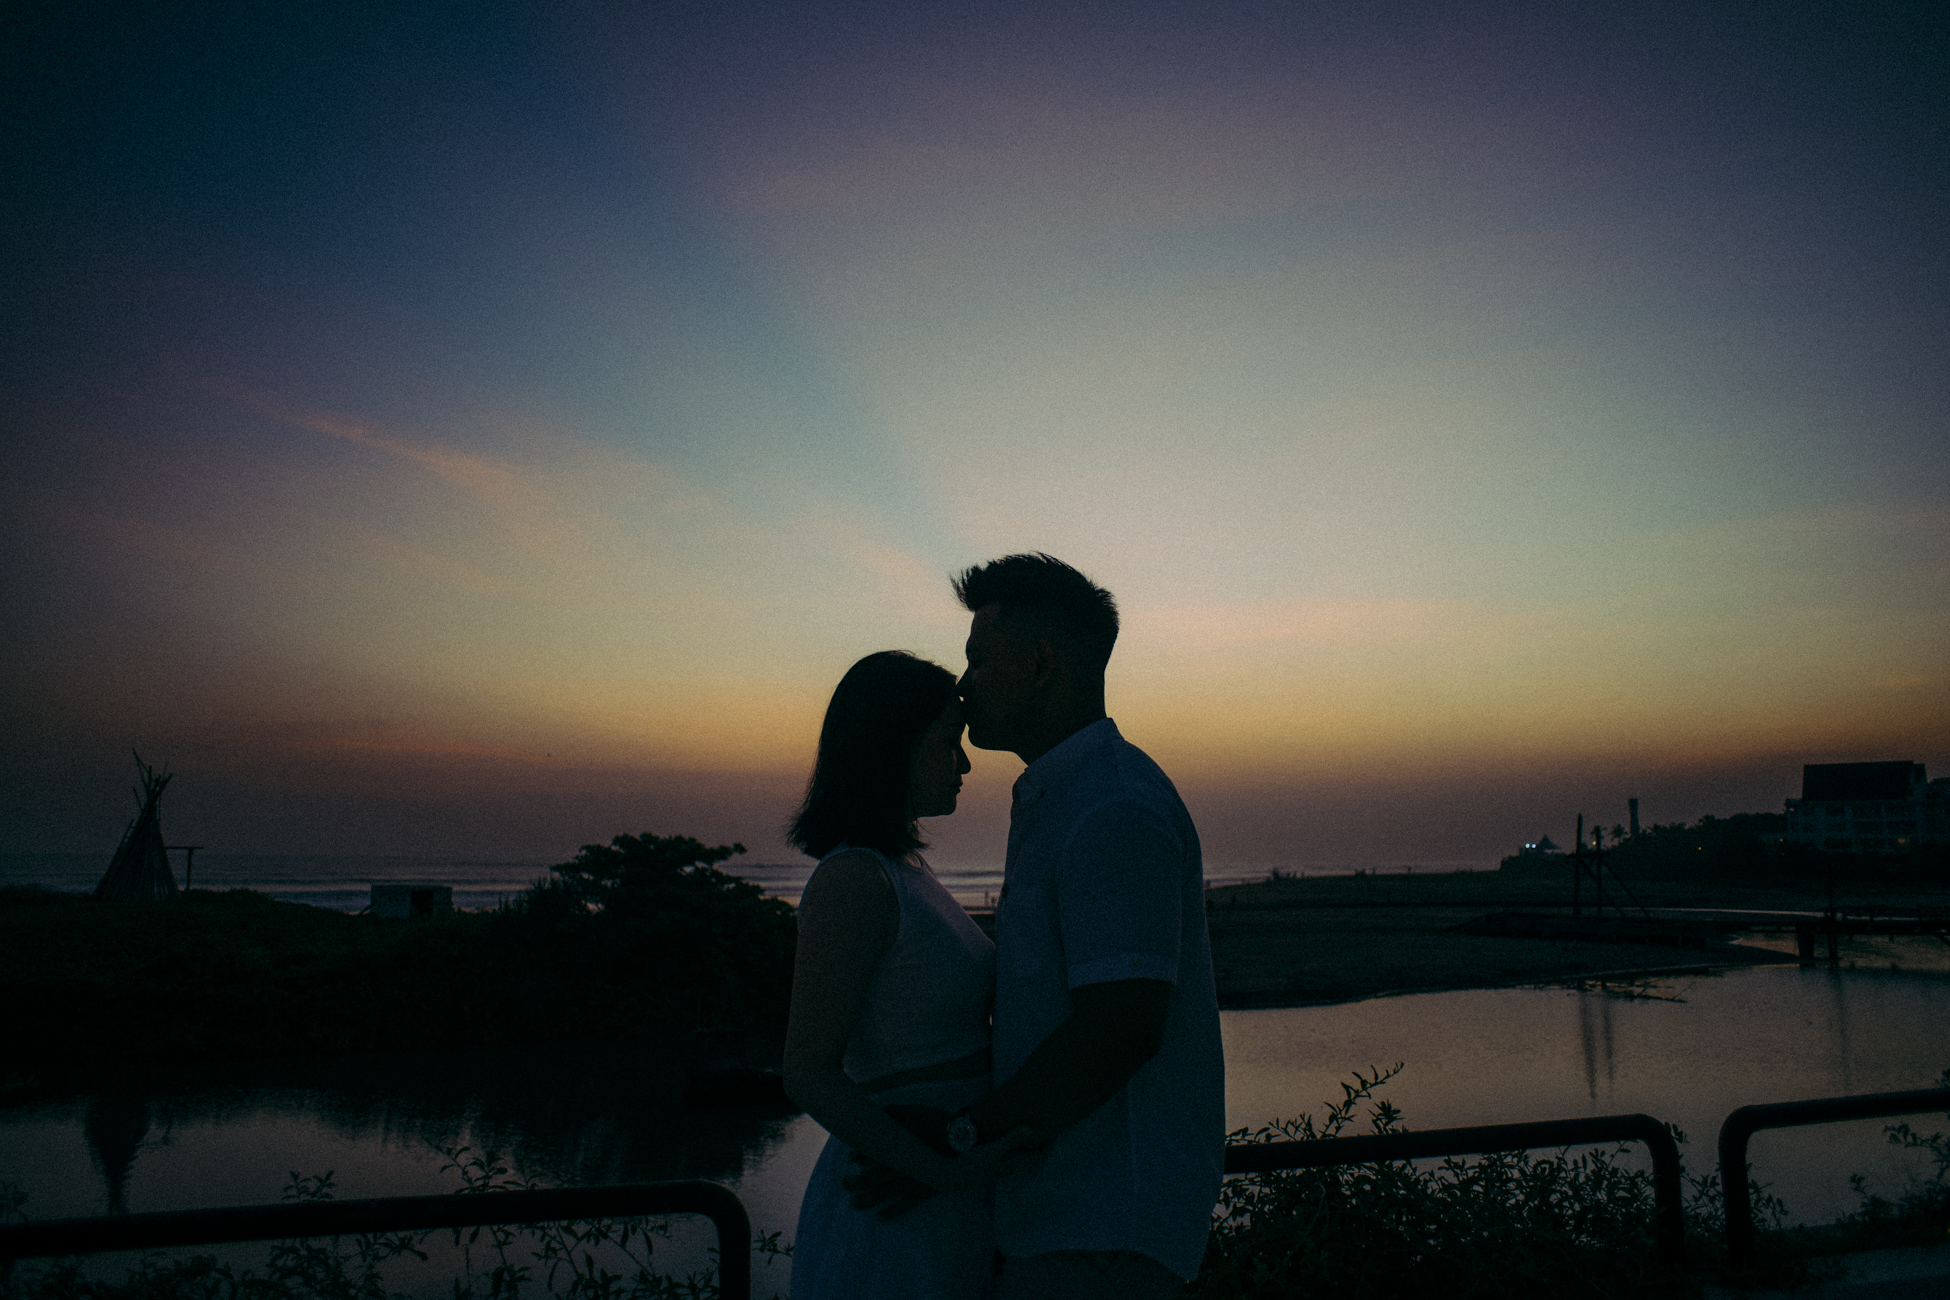 The man kiss her forehead at sunset in Canggu